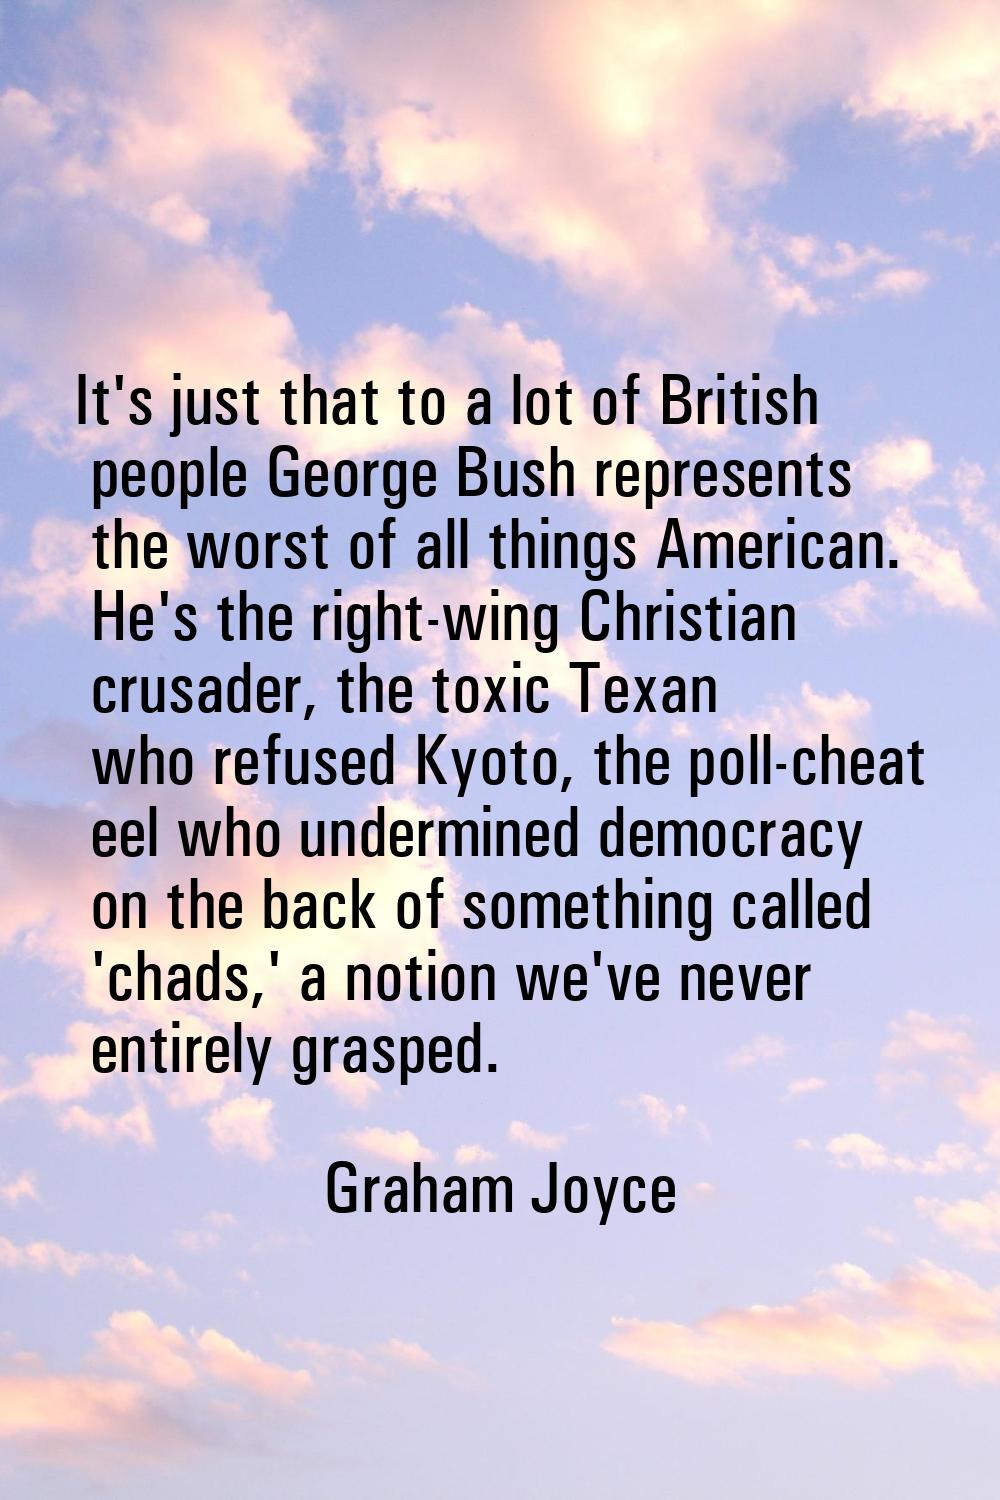 It's just that to a lot of British people George Bush represents the worst of all things American. 